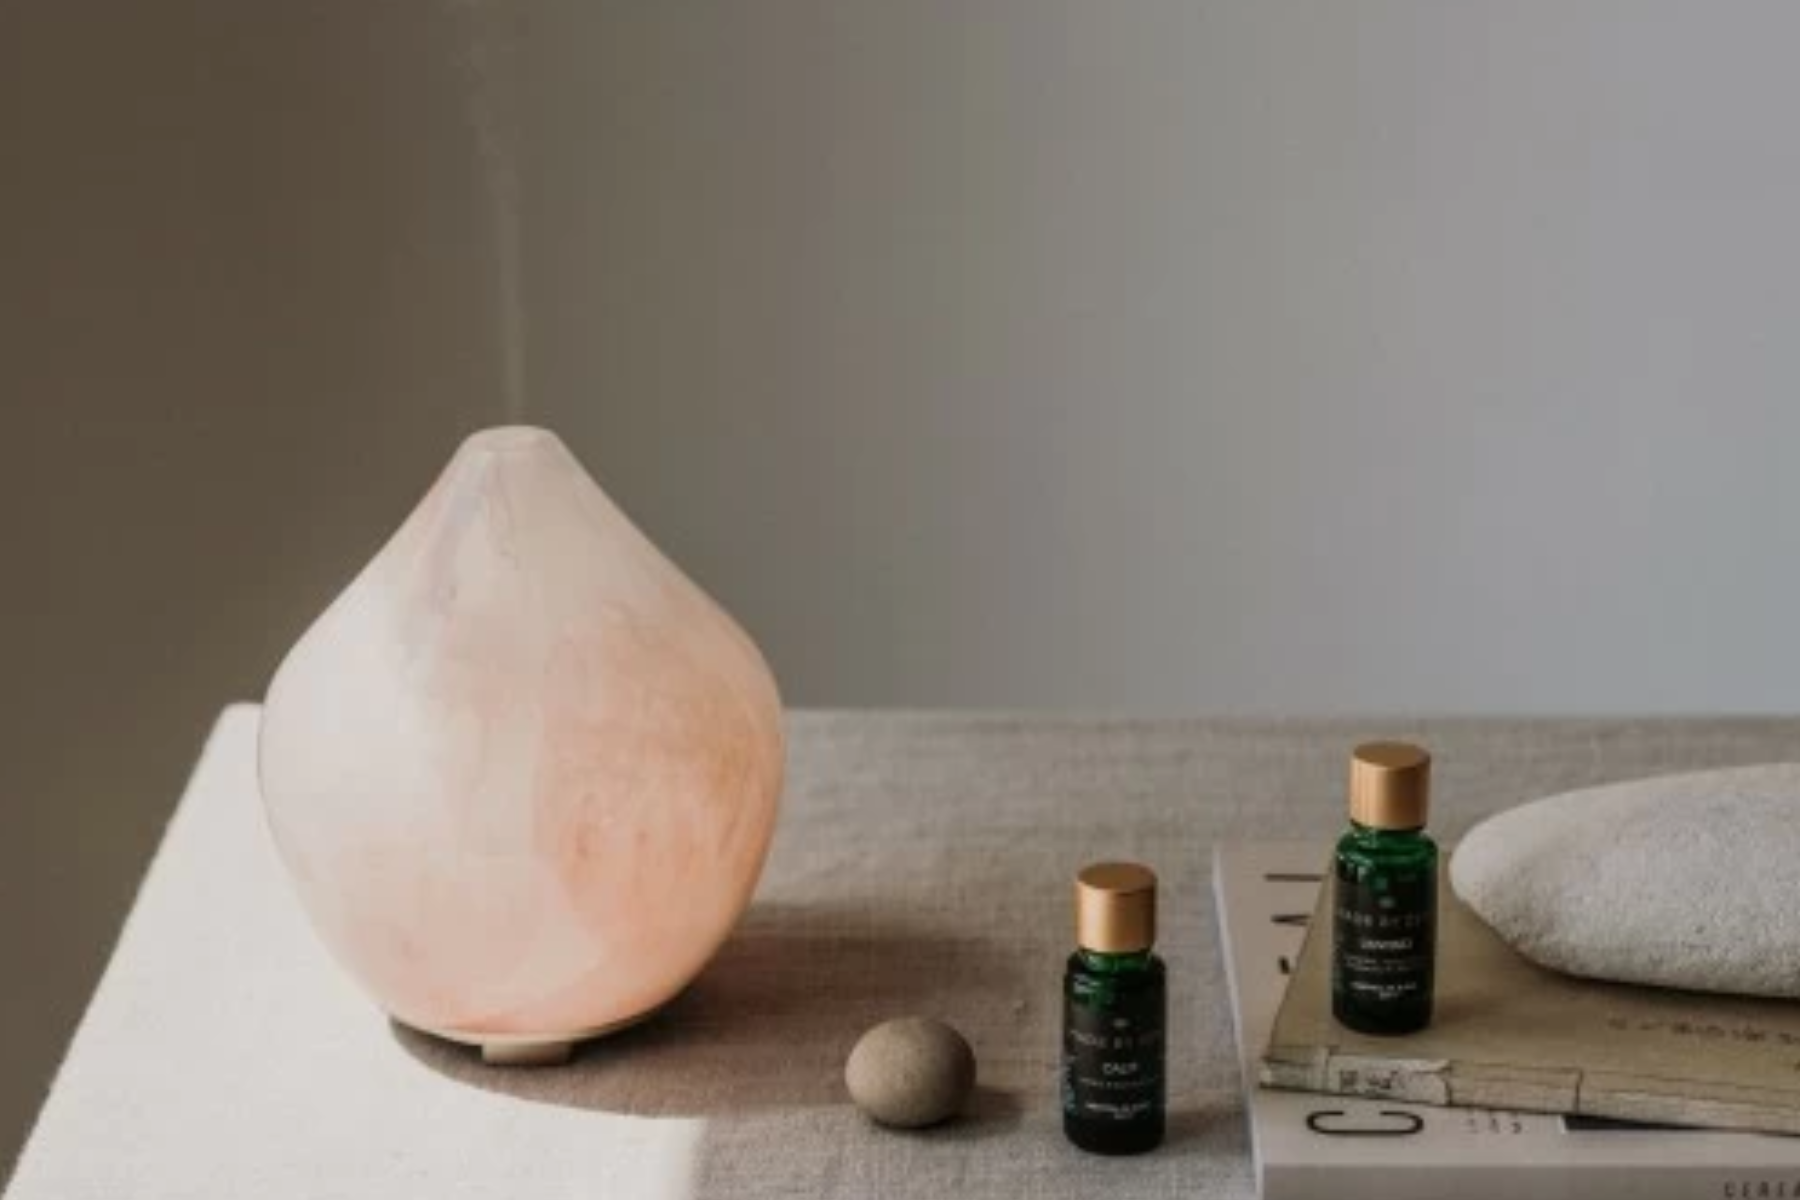 A massive gemstone diffuser at the table